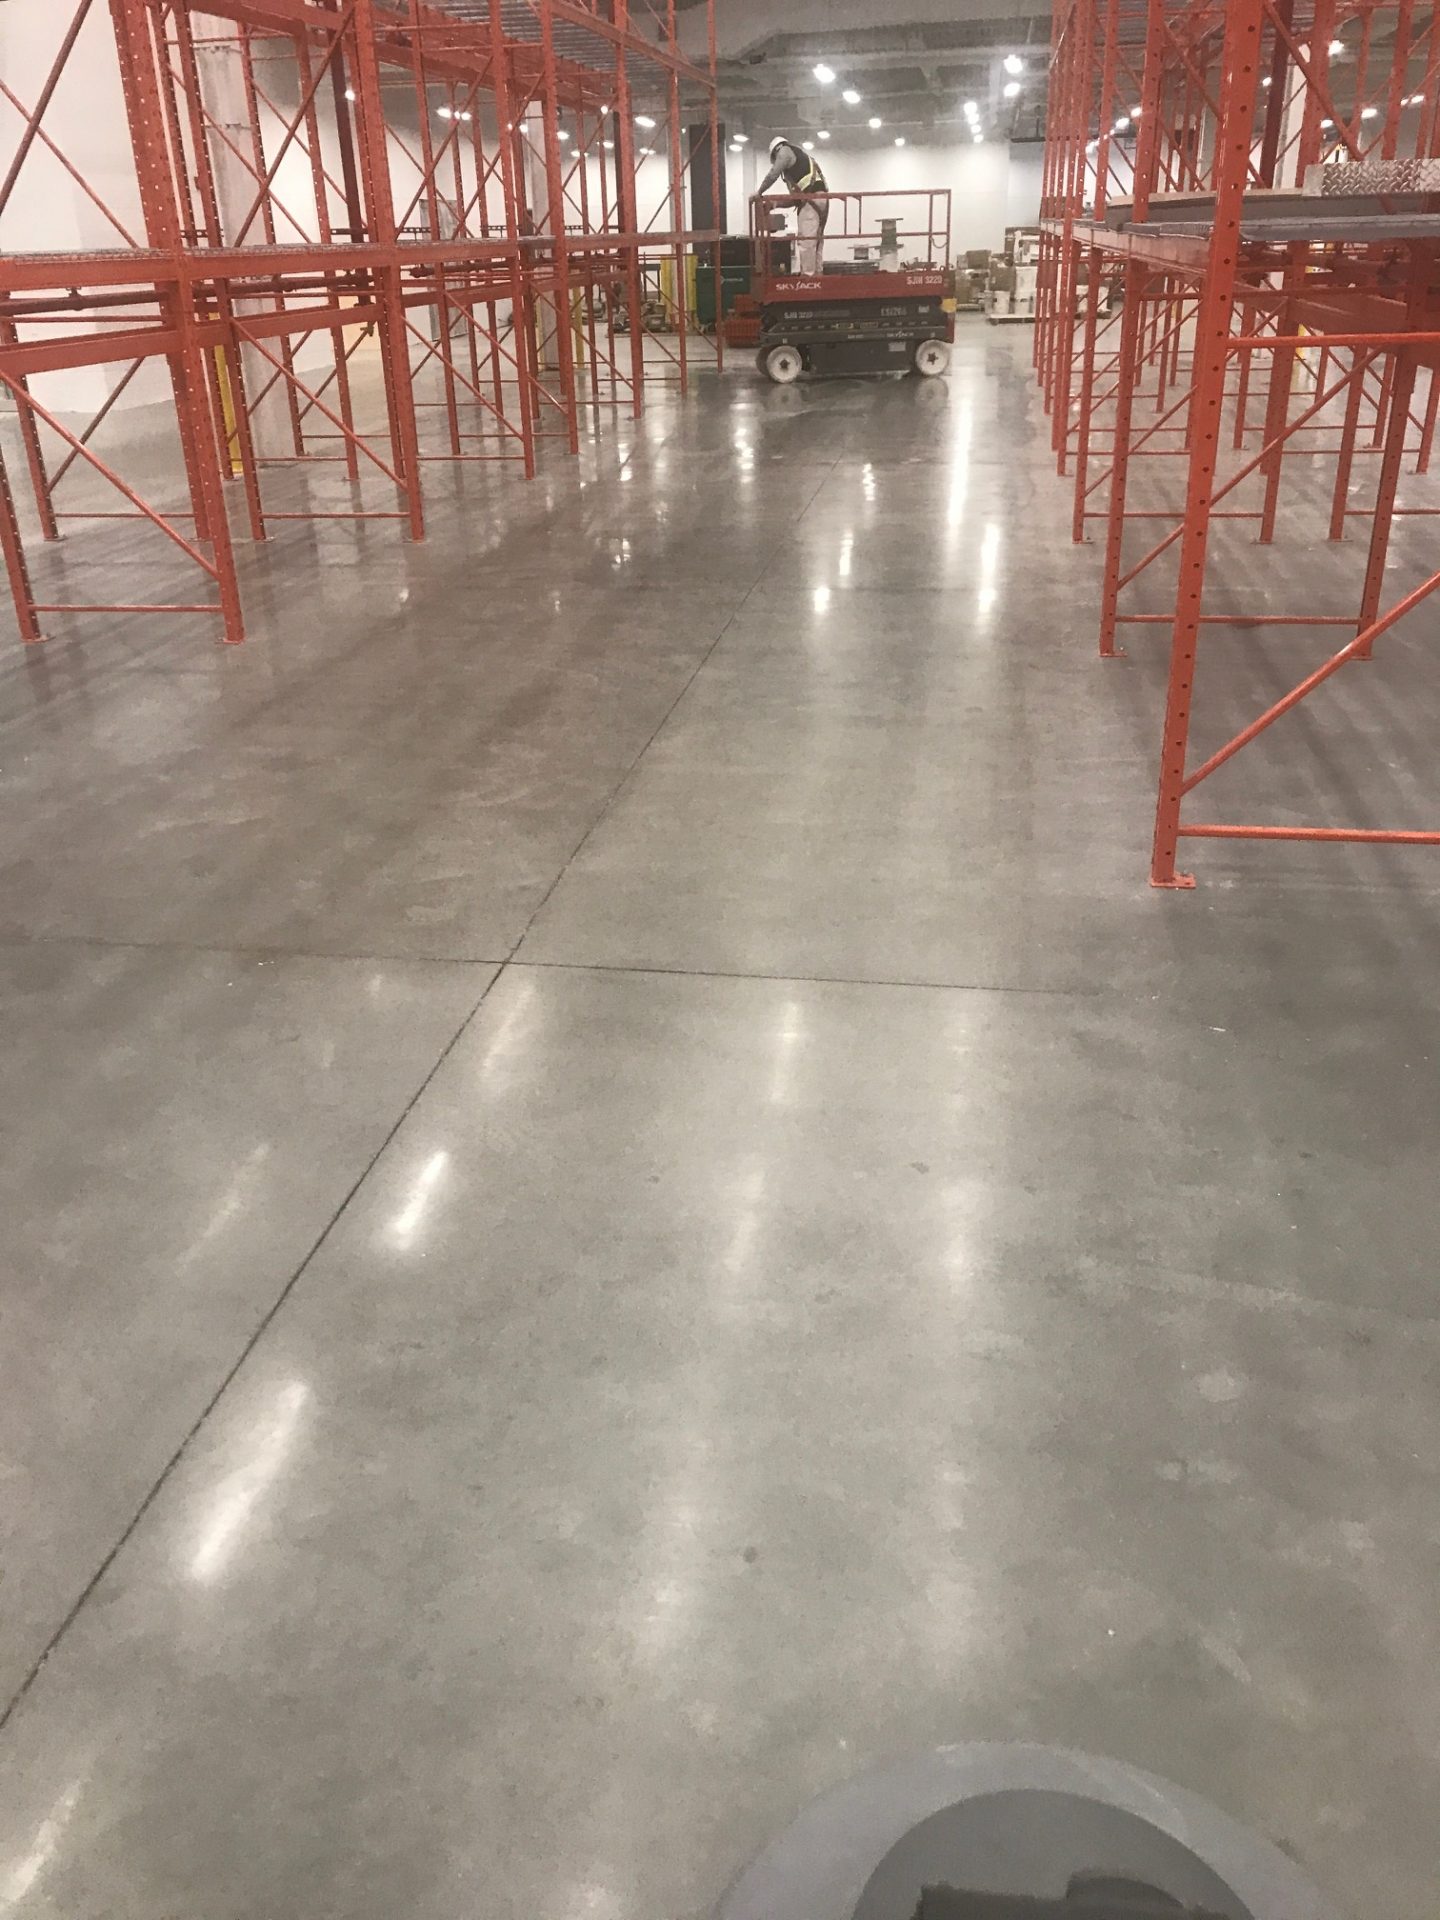 Canadian Blood Services - BTF Concrete Services - working with Bird Construction, 26,000 feet of polished concrete.